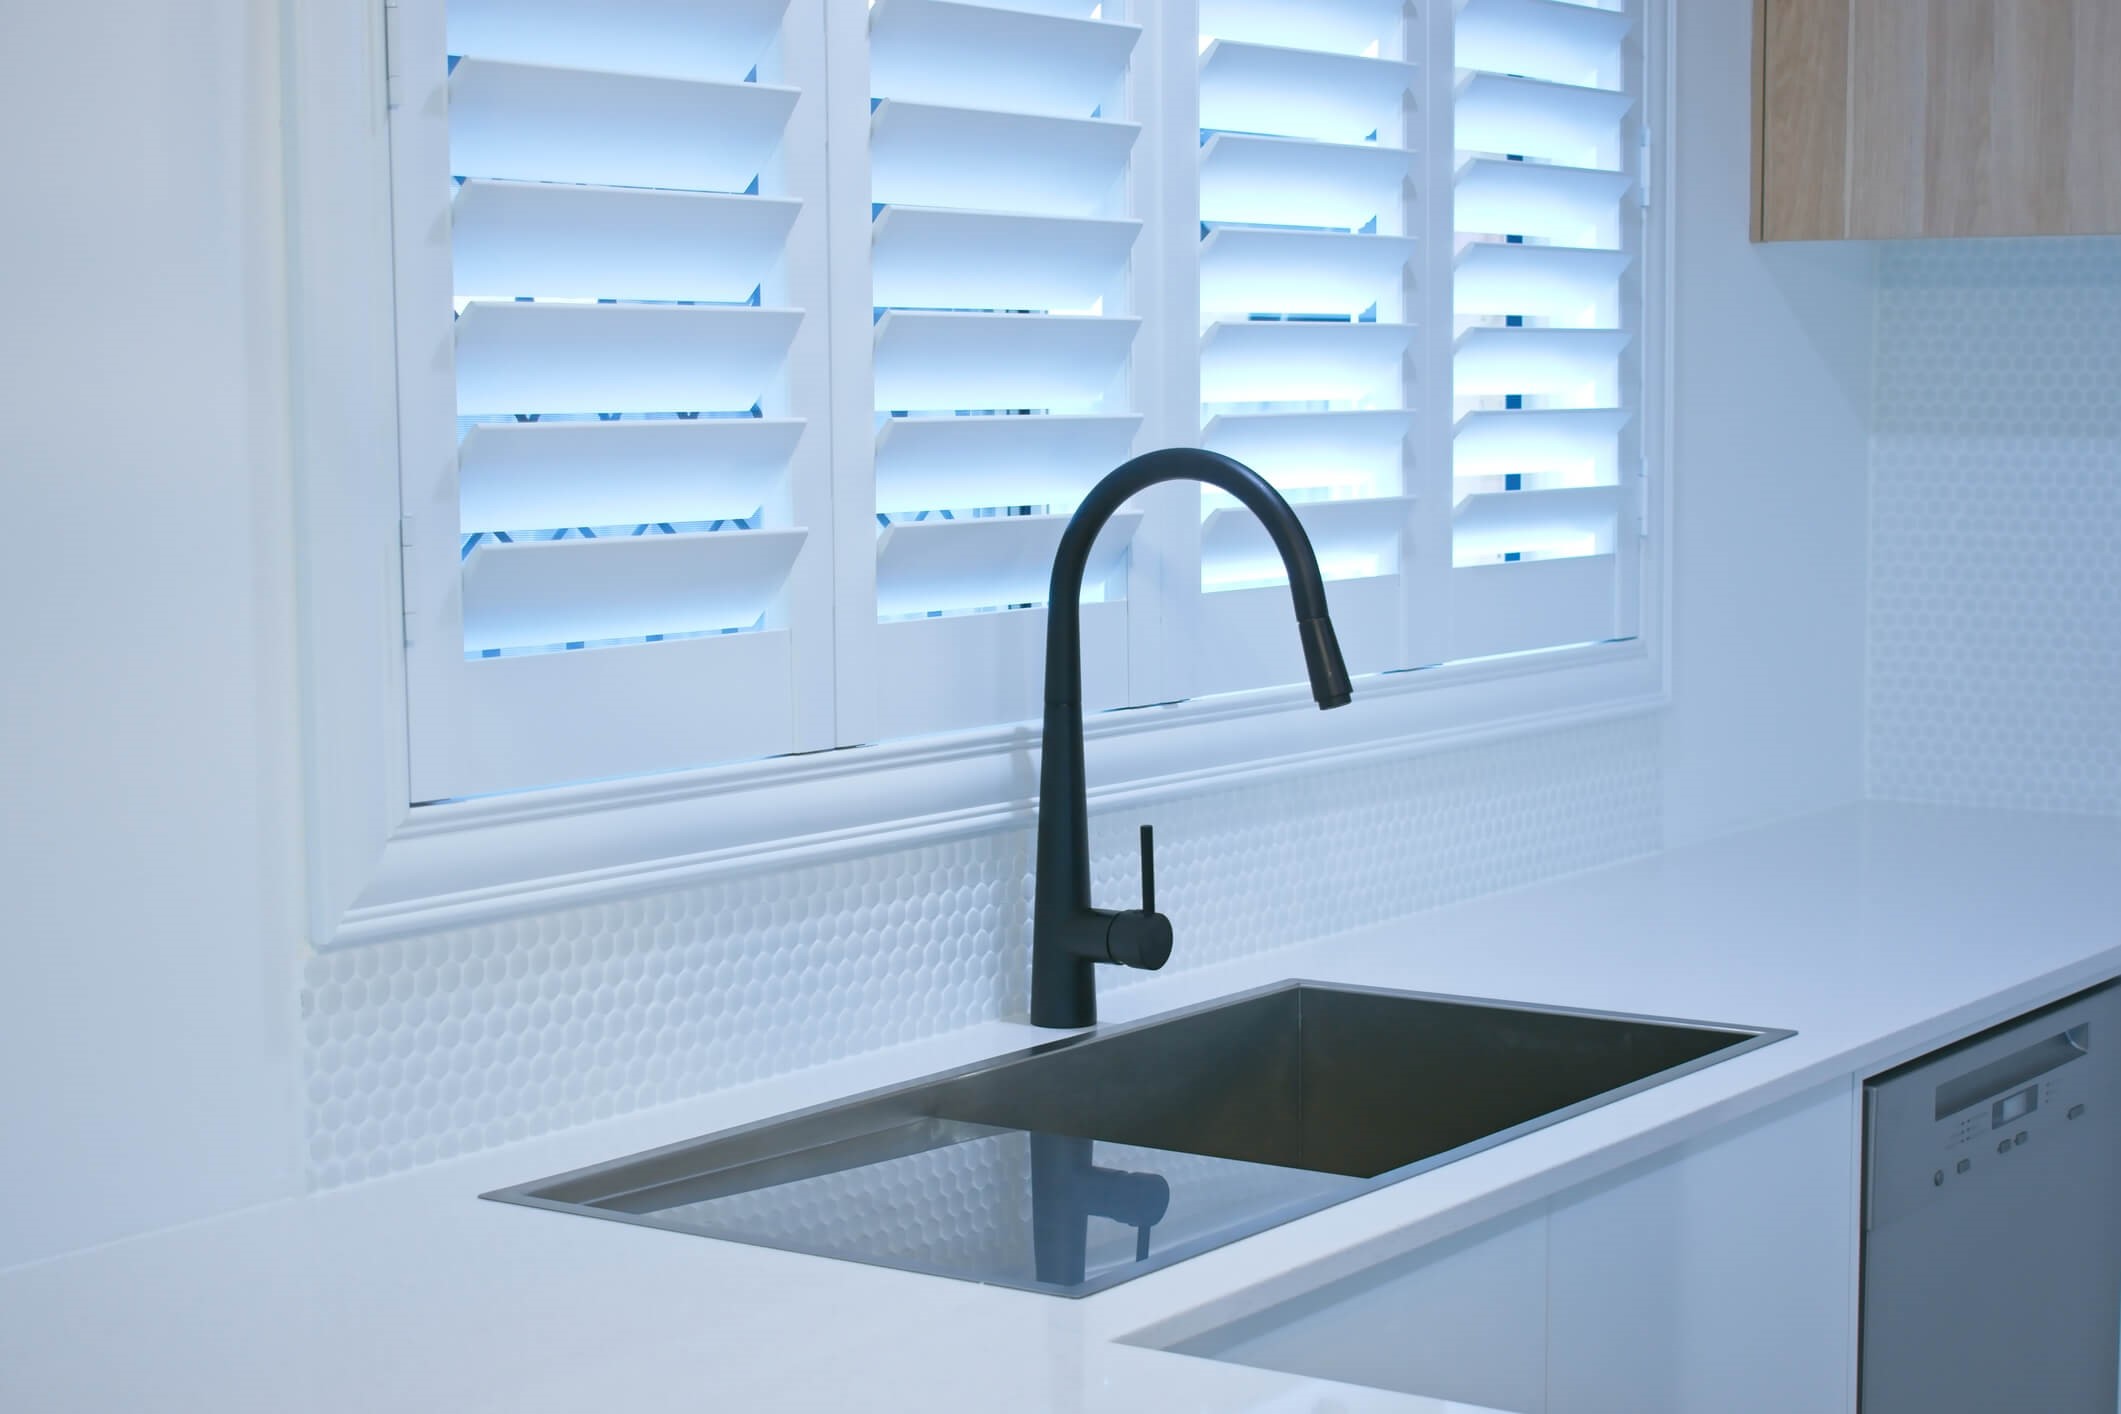 white window shutters with black tap in kitchen